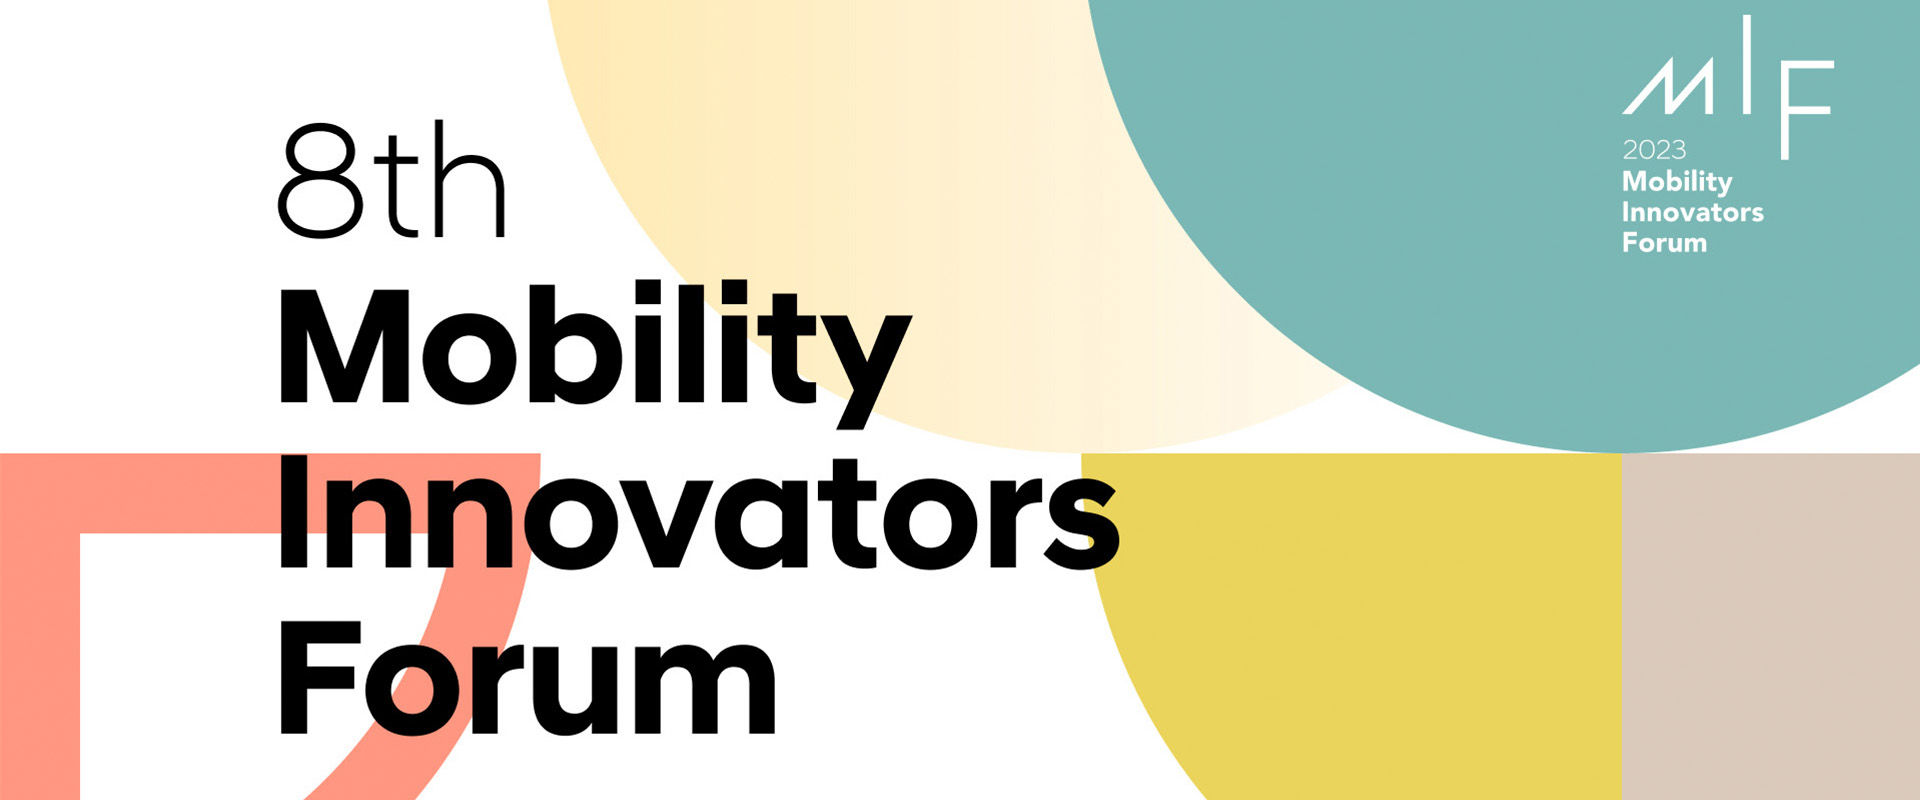 Hyundai CRADLE Gears Up for 8th Mobility Innovators Forum, Exploring 'Re-Vision & Re-Value'